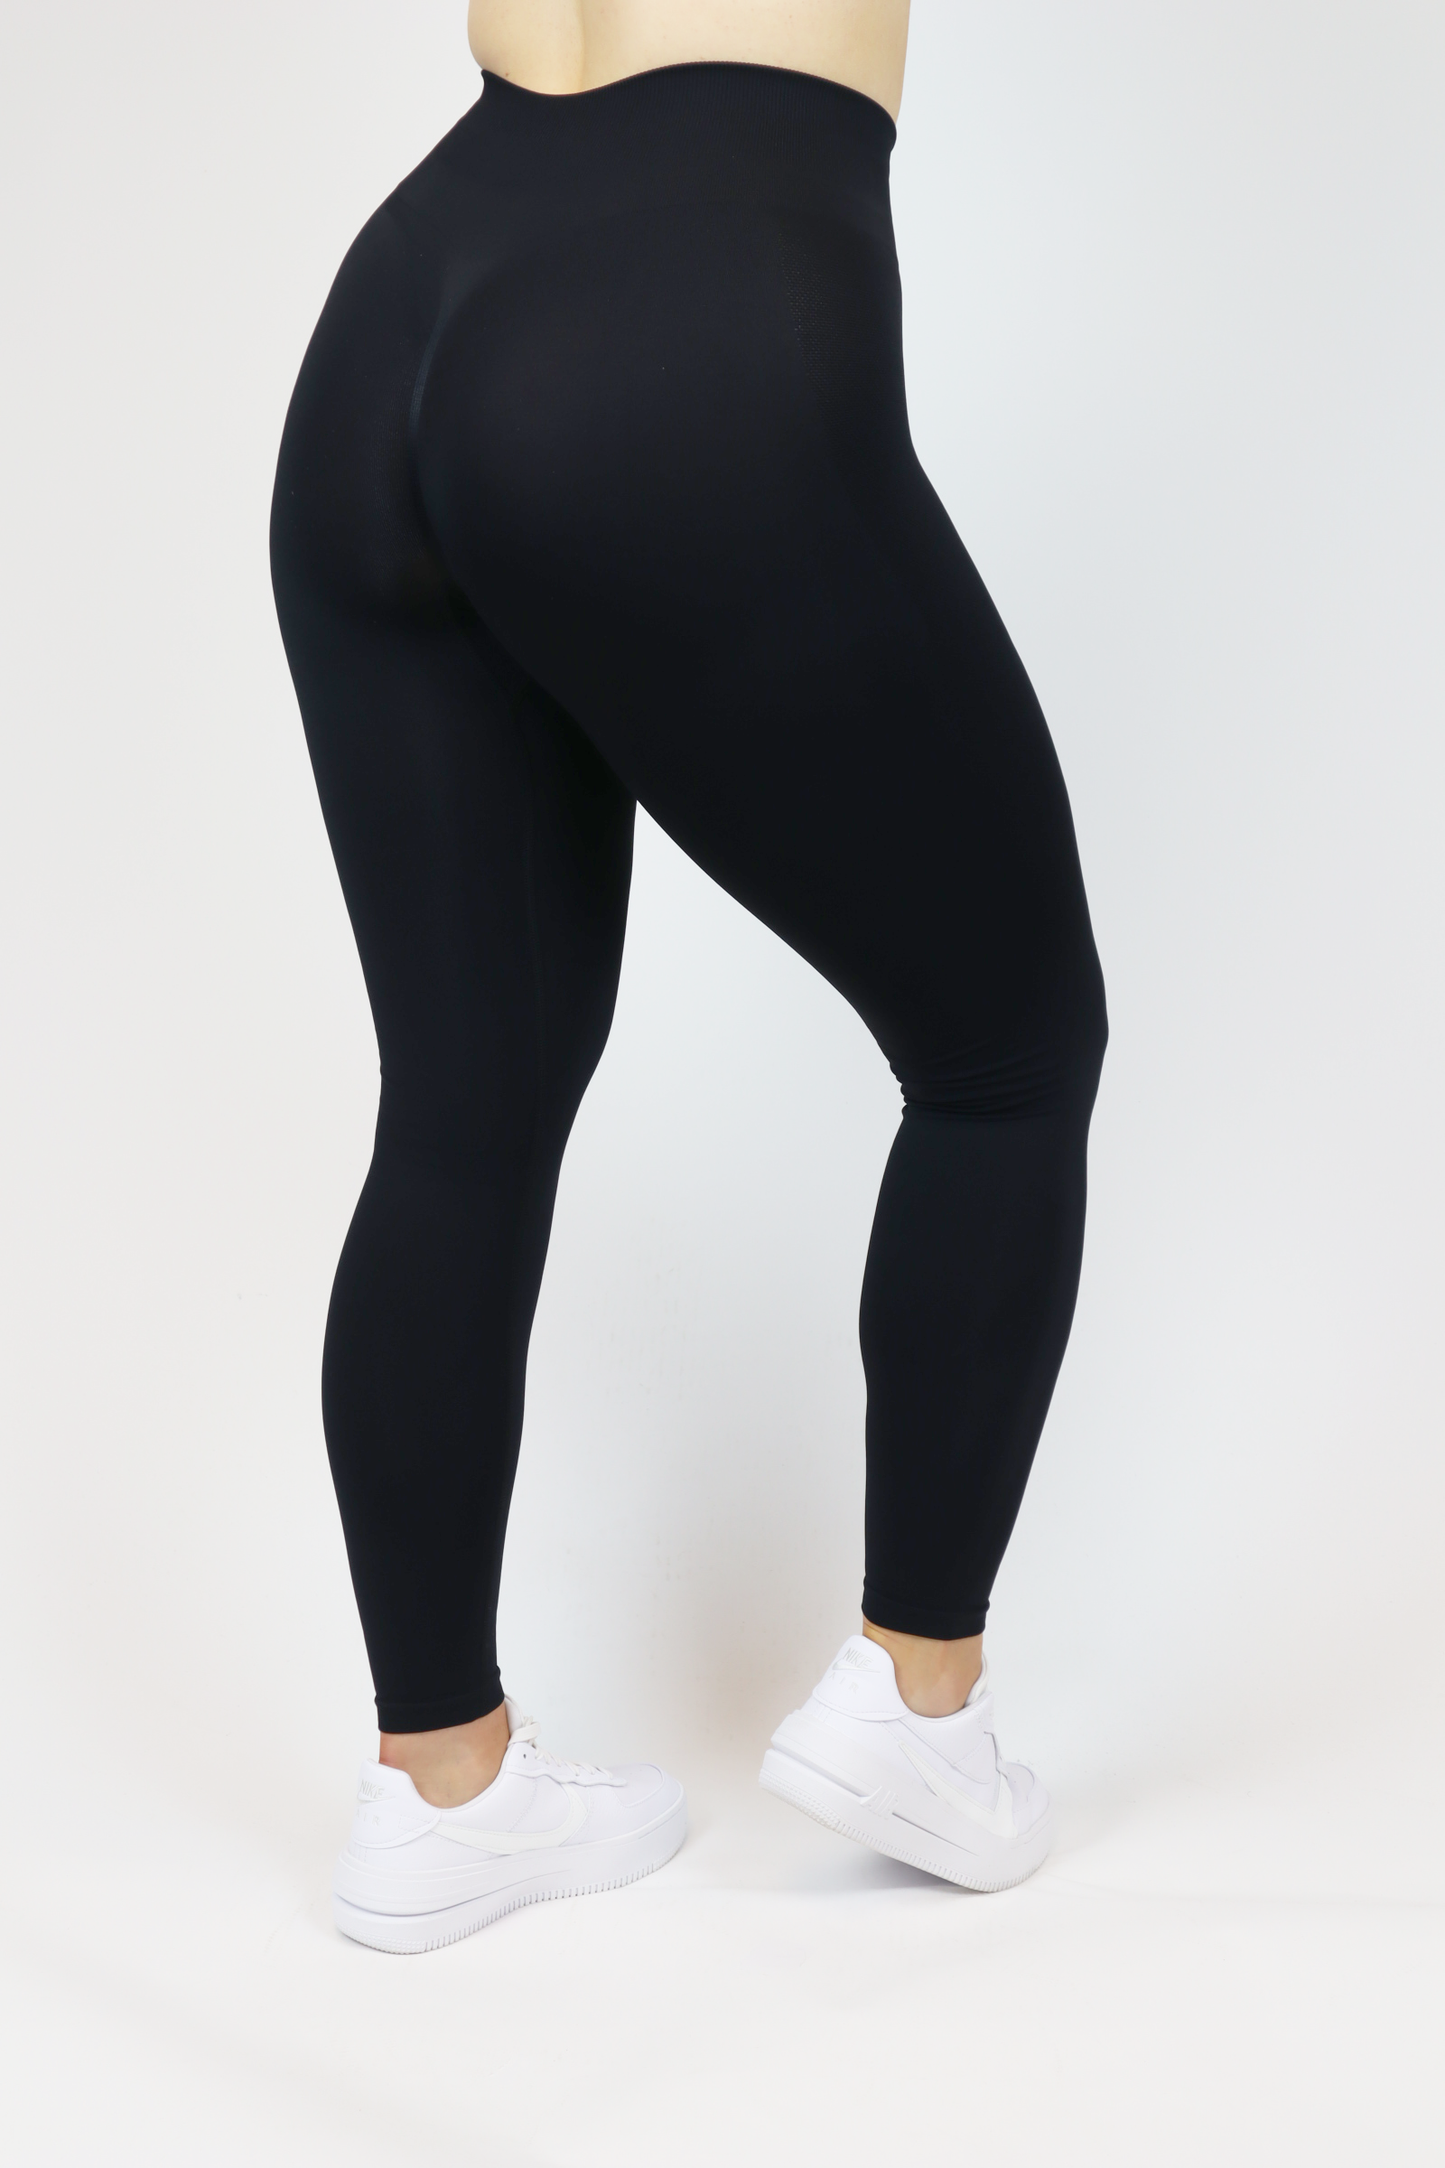 Best form fitting and comfortable women's gym leggings 